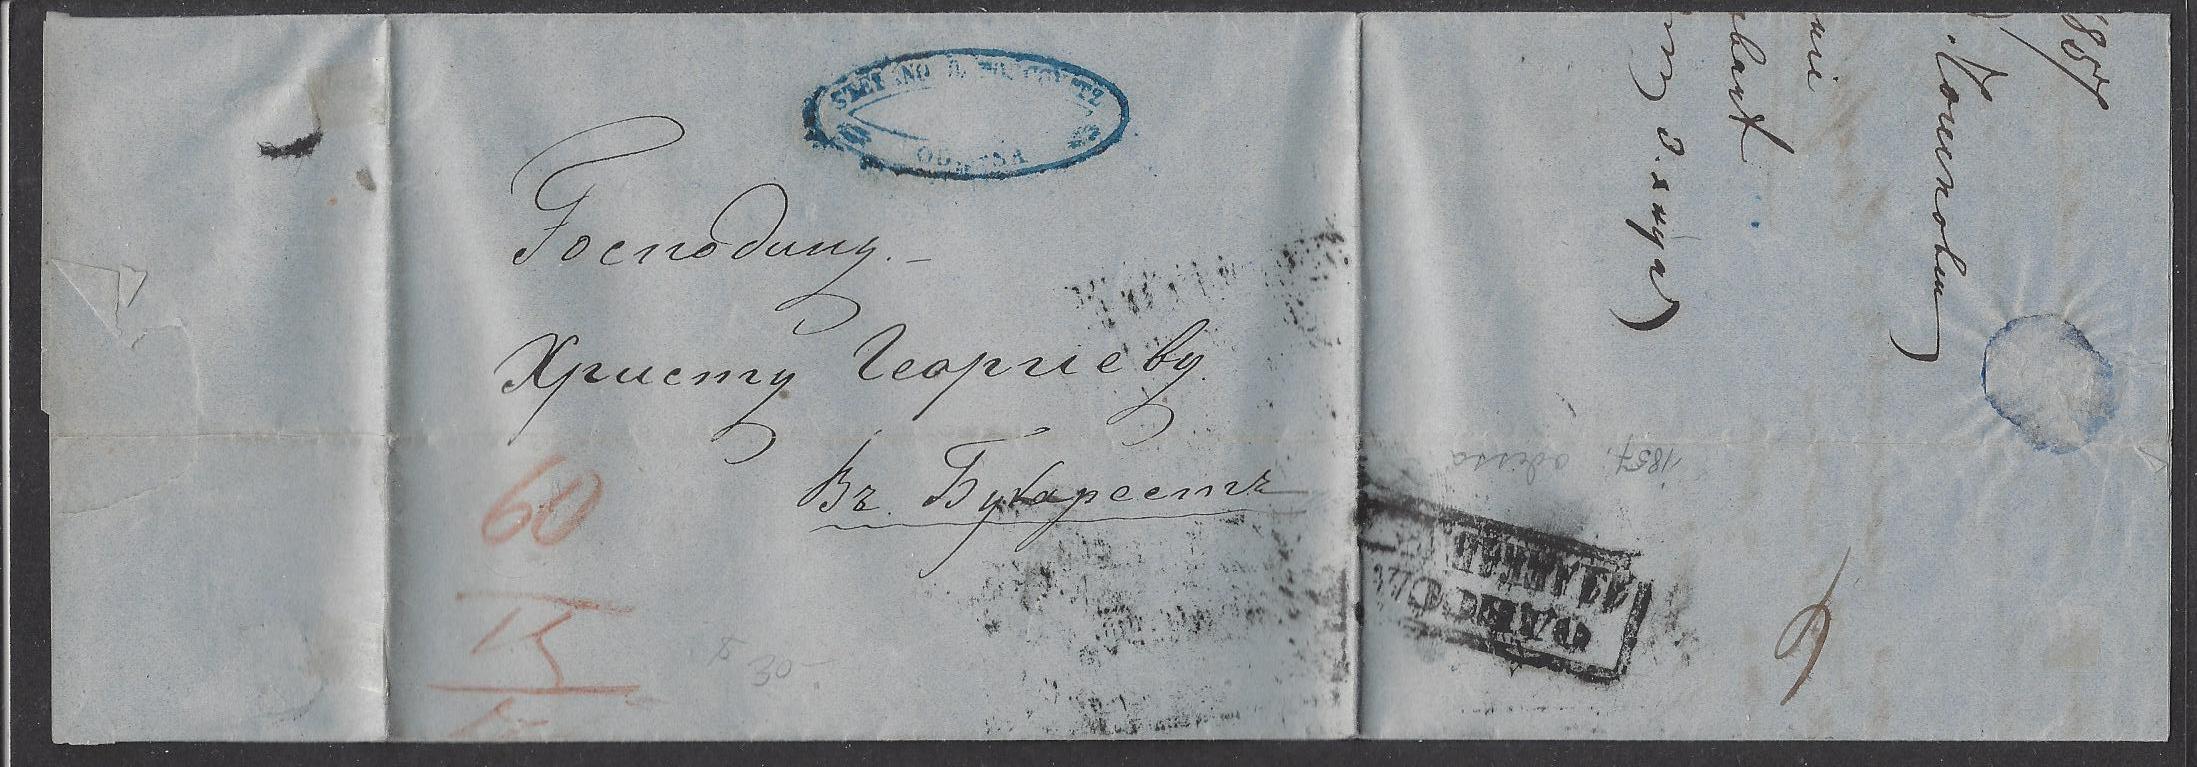 Russia Postal History - Stampless Covers Odessa Scott 2501857 